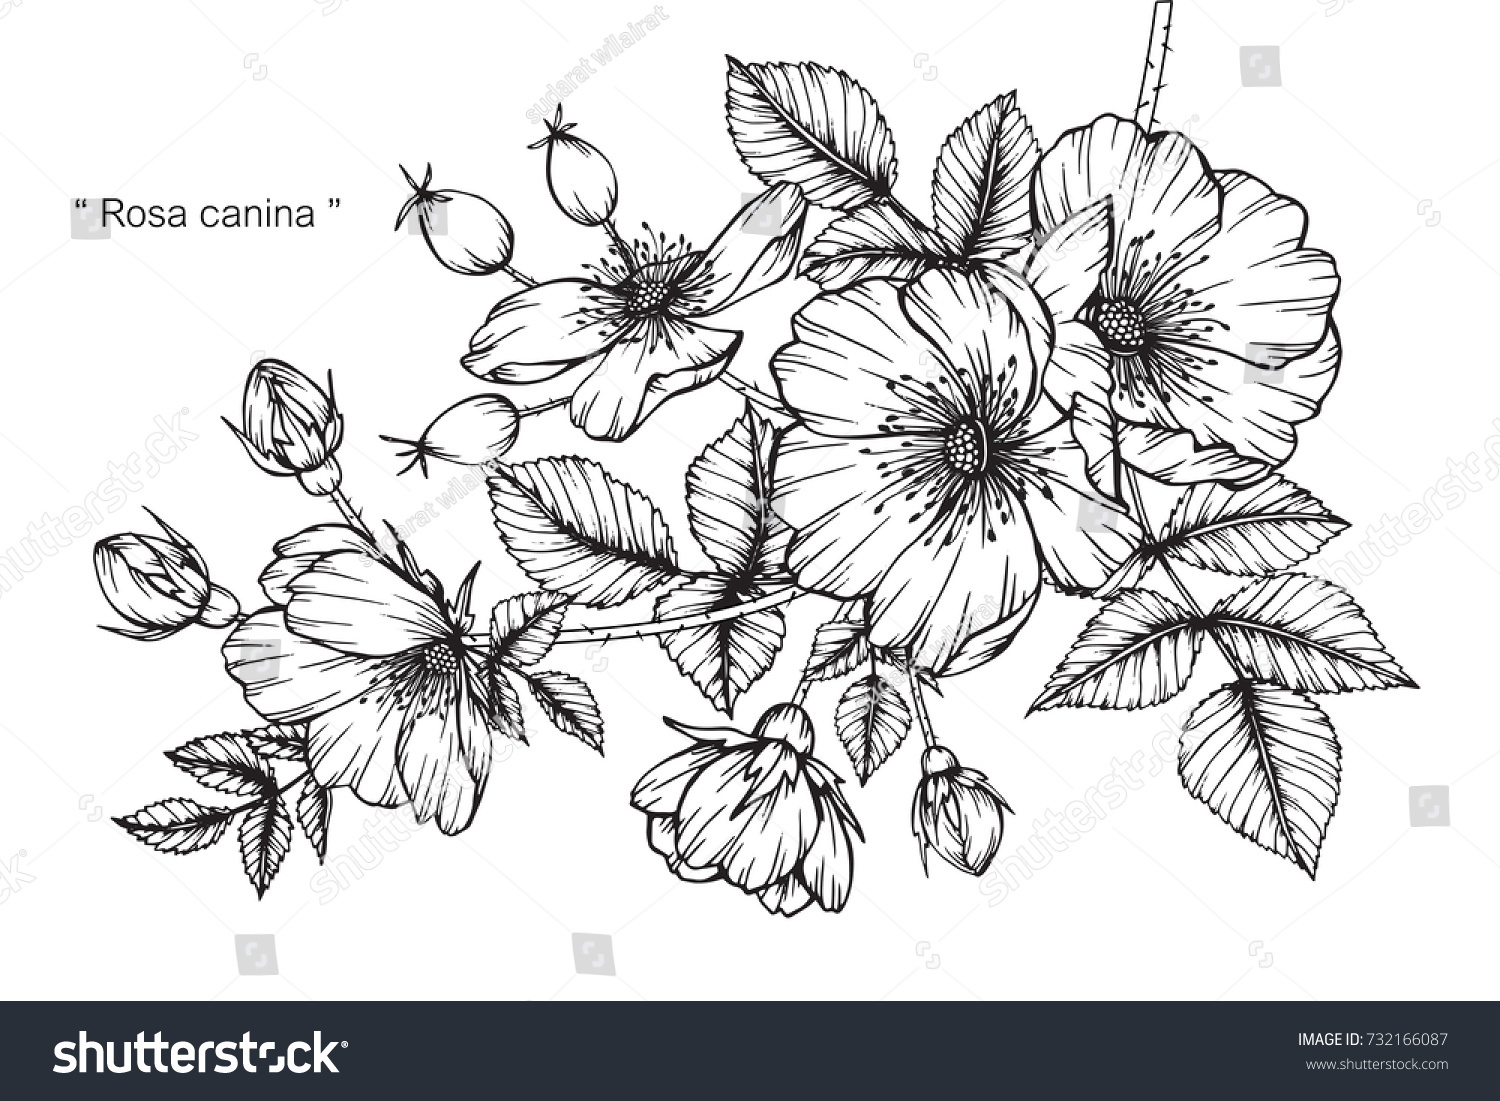 Hand drawing and sketch Rosa canina flower. Black and white with line art illustration. #732166087